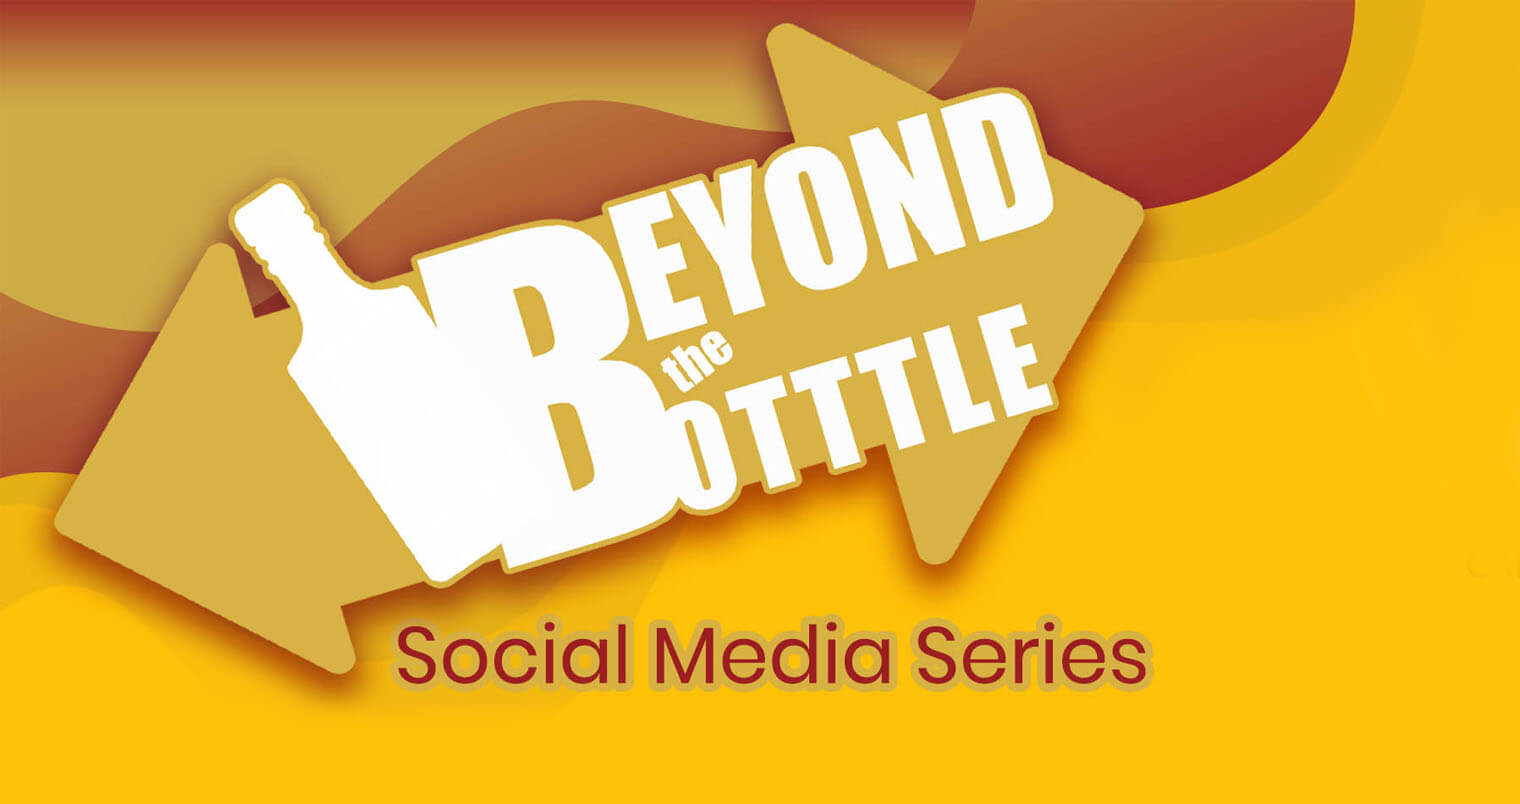 Beyond the Bottle Series